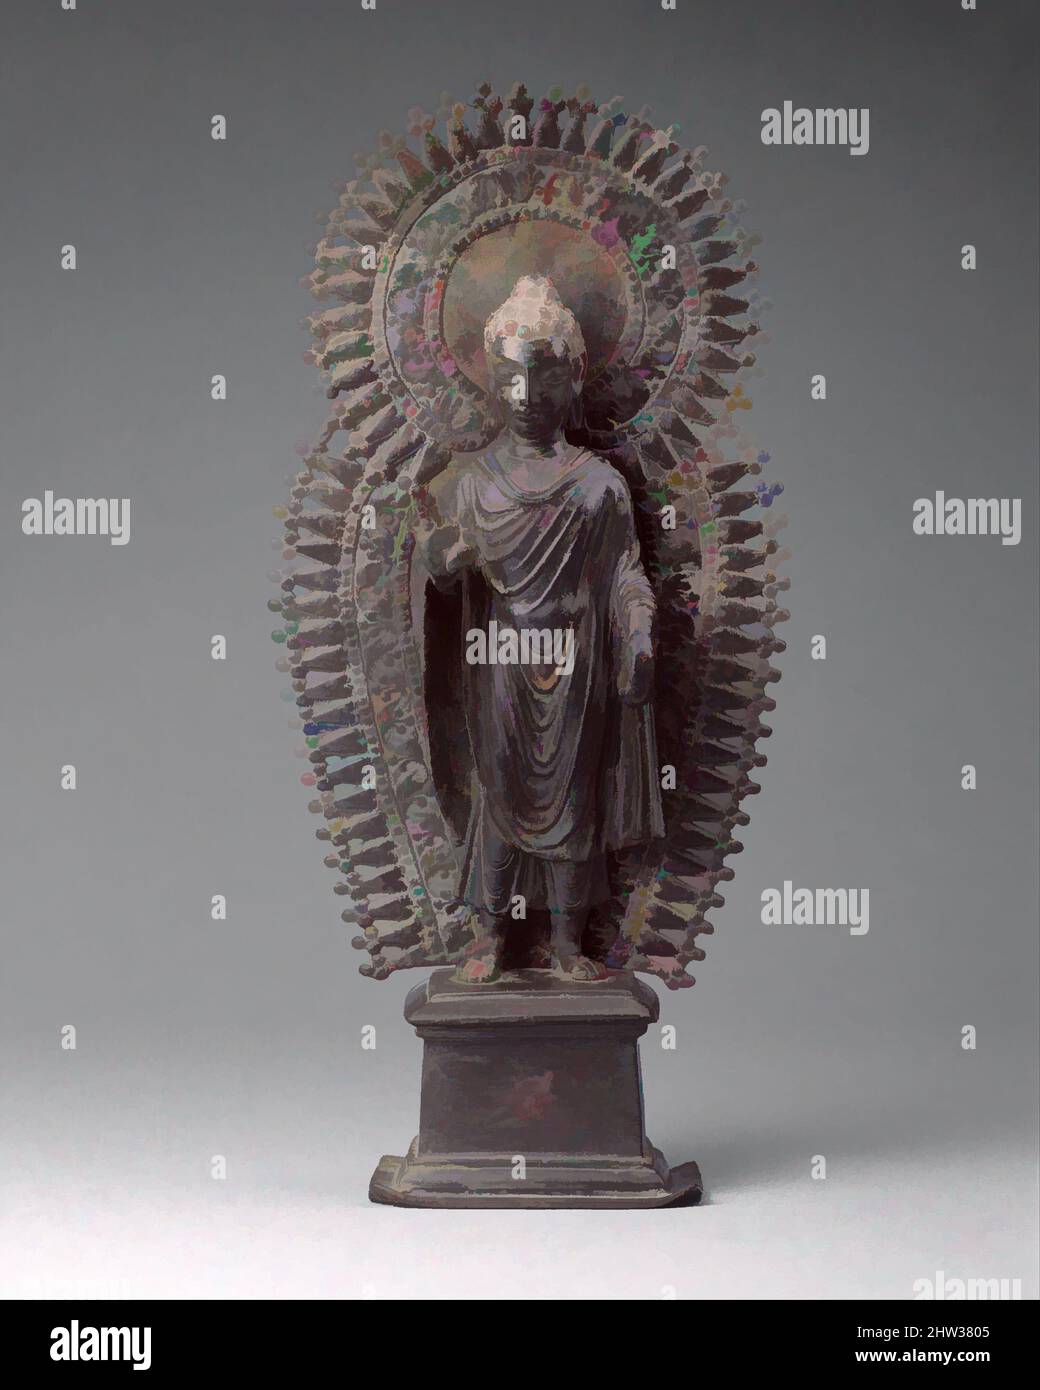 Art inspired by Standing Buddha with Radiate Combined Halo, ca. late 6th century, Pakistan (ancient region of Gandhara), Brass, H. 13 1/4 in. (33.7 cm), Sculpture, A few small personal images from Gandhara representing the Buddha have survived. This metal image blends elements seen in, Classic works modernized by Artotop with a splash of modernity. Shapes, color and value, eye-catching visual impact on art. Emotions through freedom of artworks in a contemporary way. A timeless message pursuing a wildly creative new direction. Artists turning to the digital medium and creating the Artotop NFT Stock Photo